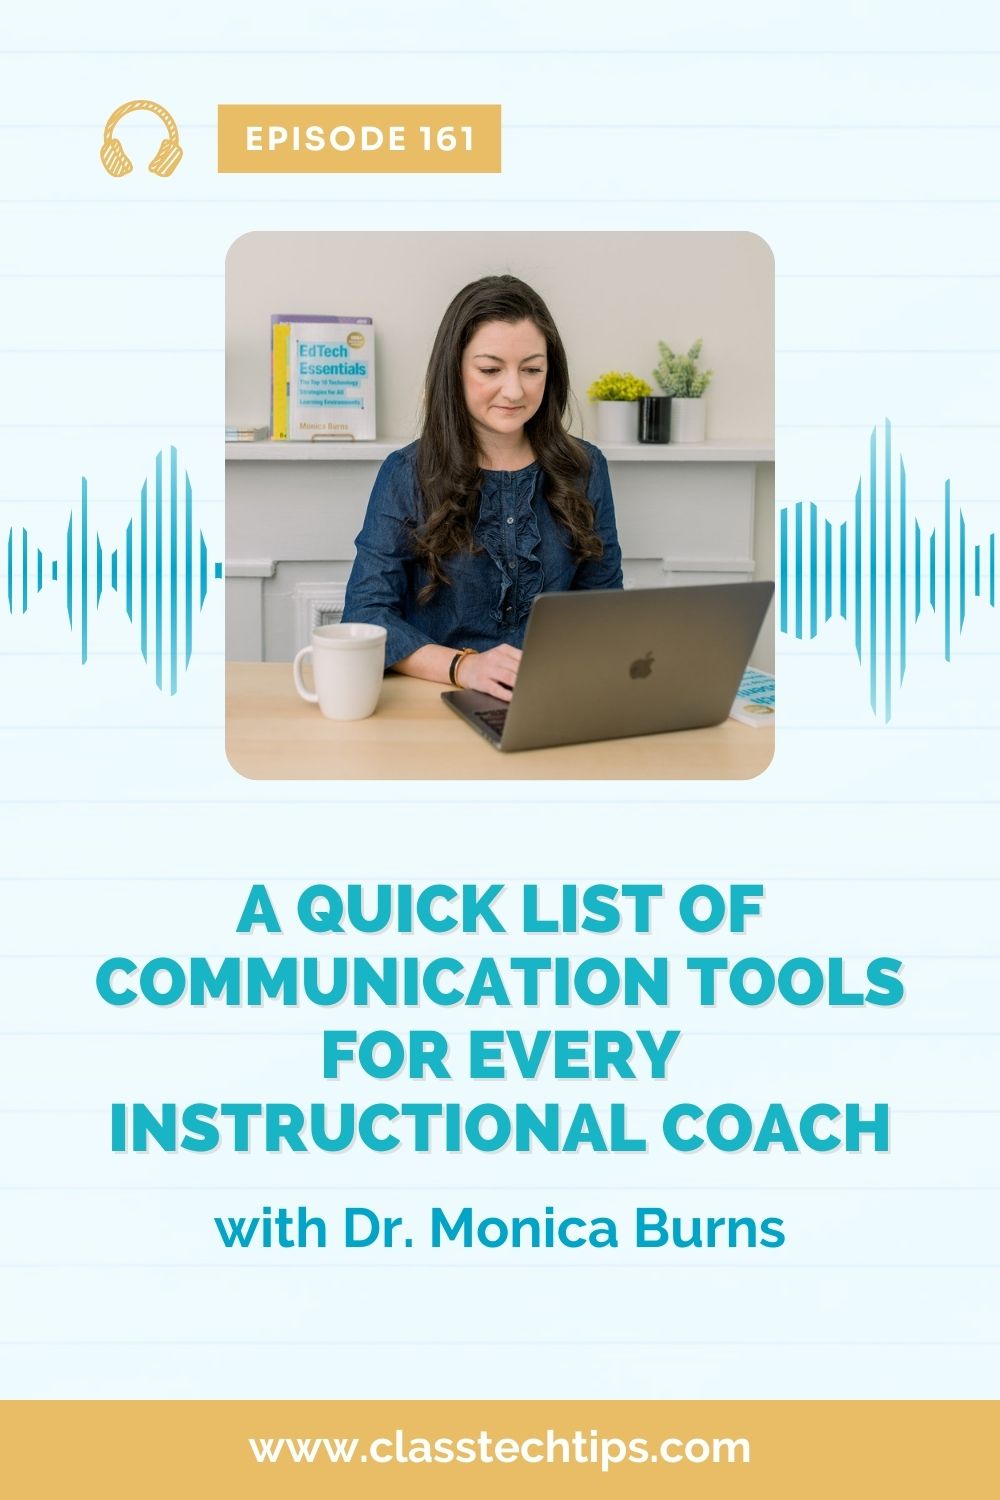 Explore a quick list of digital communication tools any instructional coach can use to stay connected and make meetings more productive.